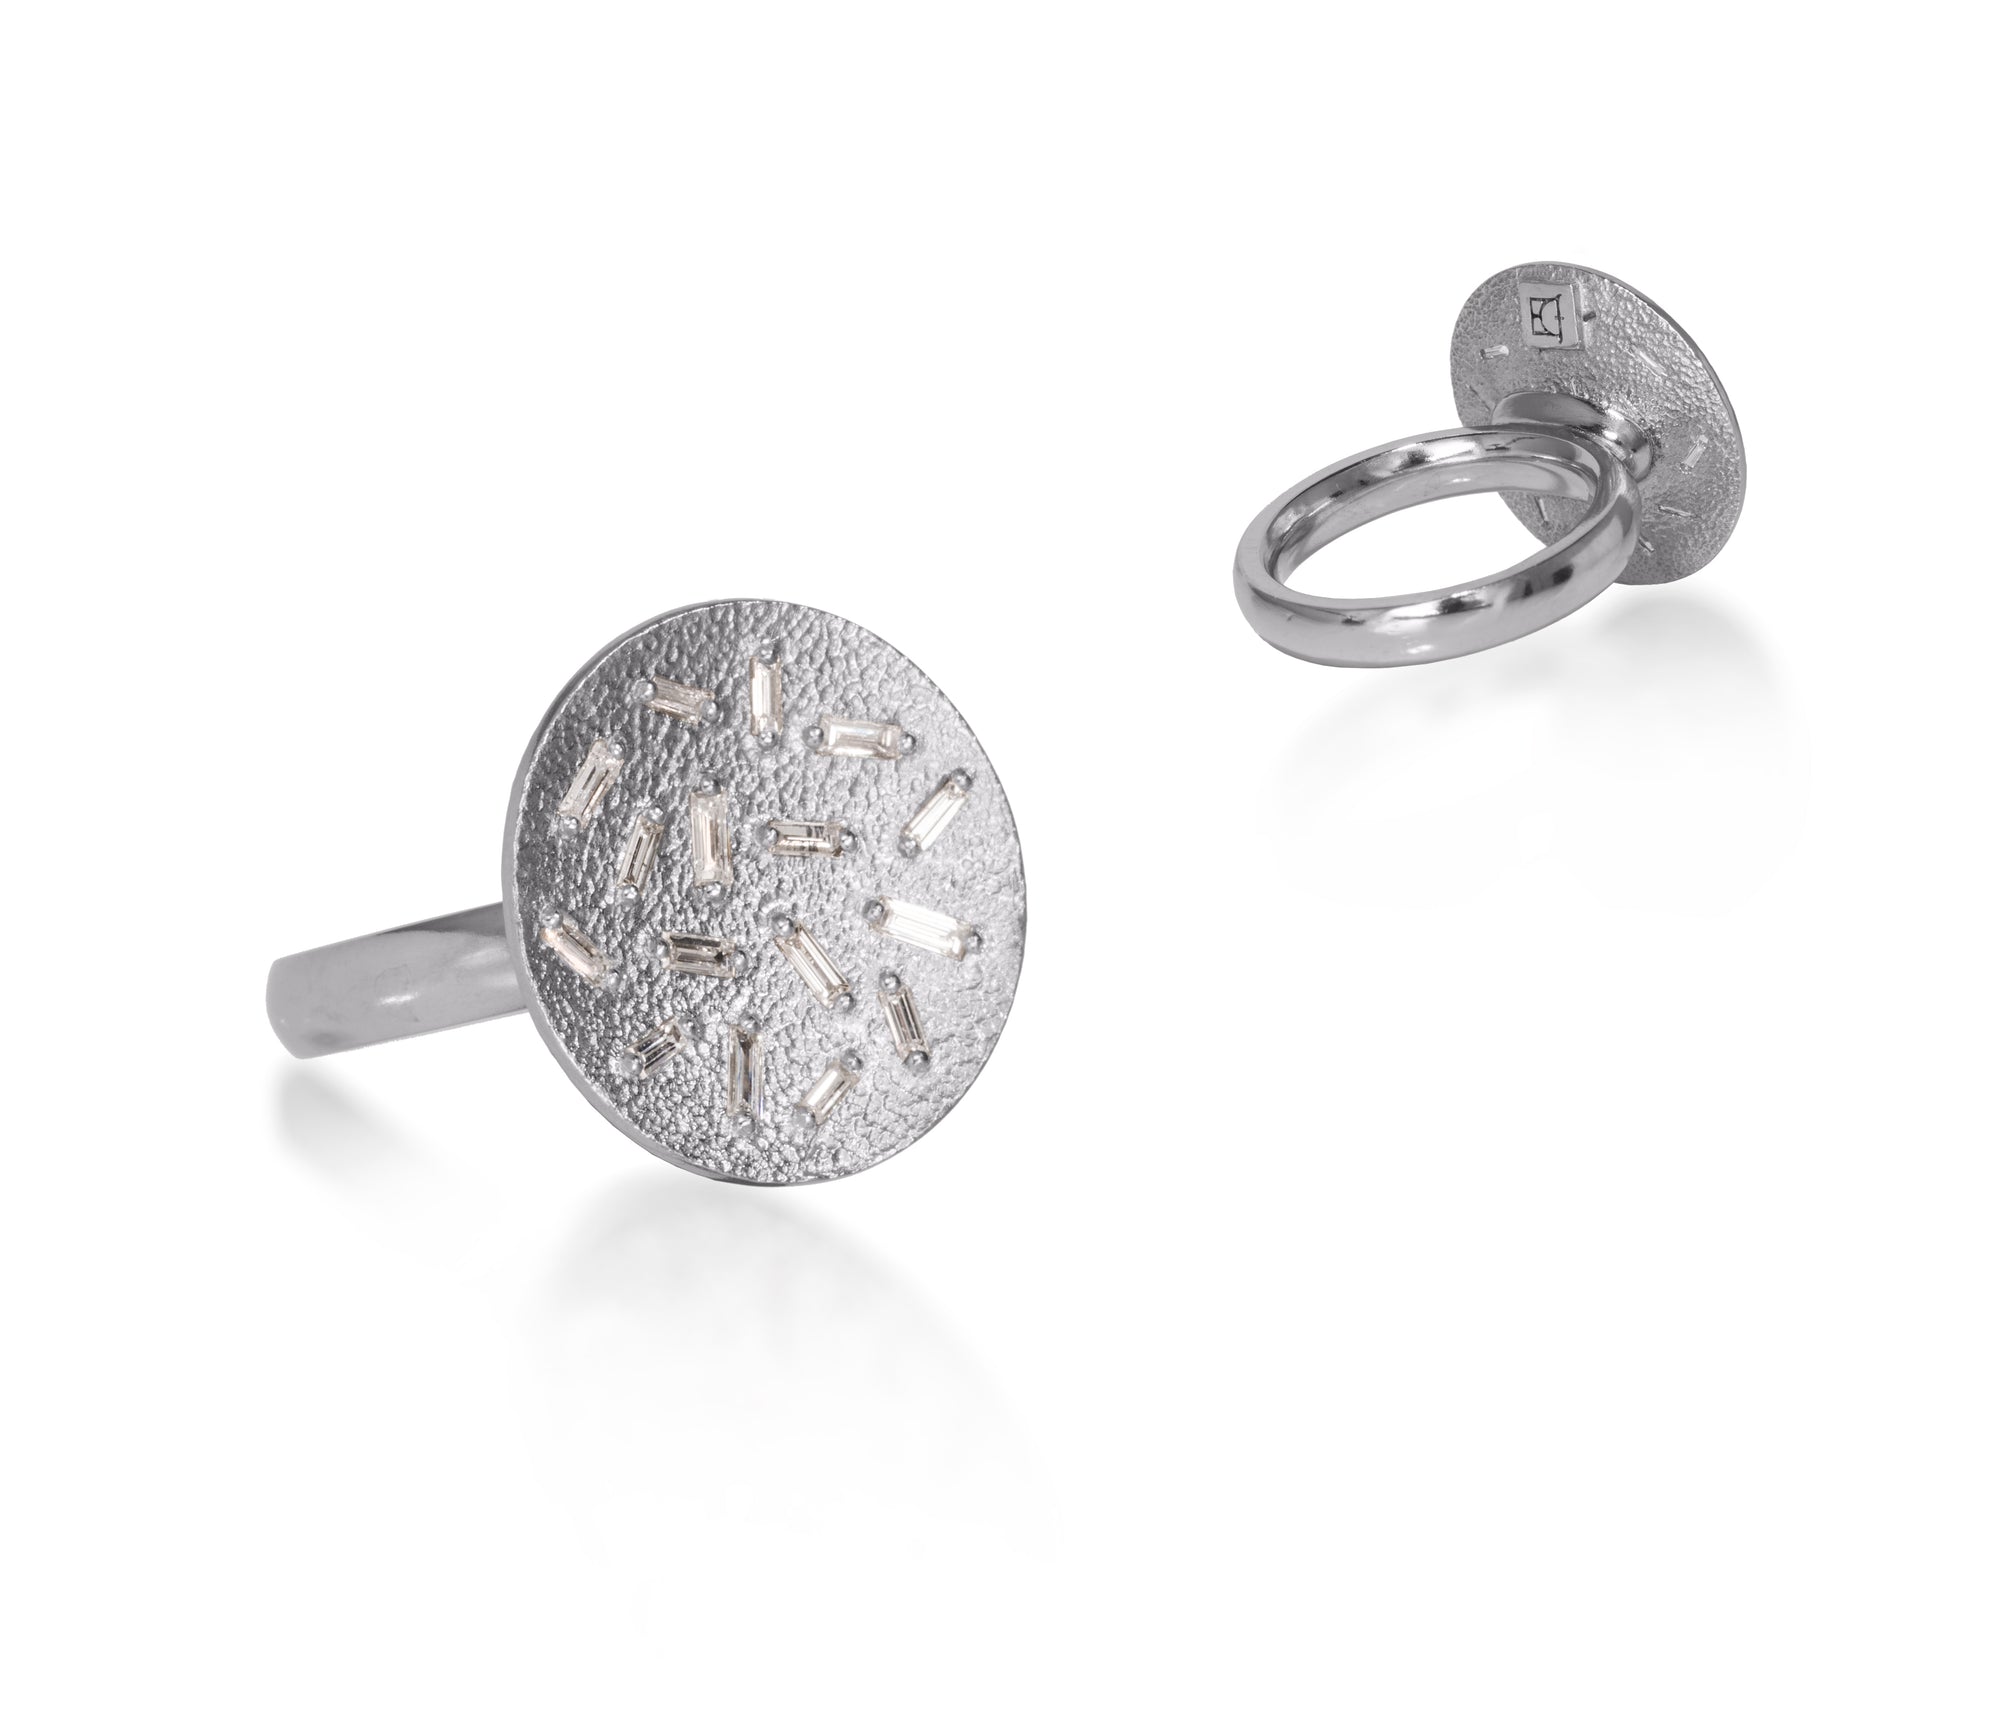 This medium circular pendant ring is set with 16 white diamond baguettes. It is available in three richly textured color ways, oxidized silver, 18k gold and palladium.  The random angles of the baguettes catch the light in exciting ways when worn. 0.435 tcw.